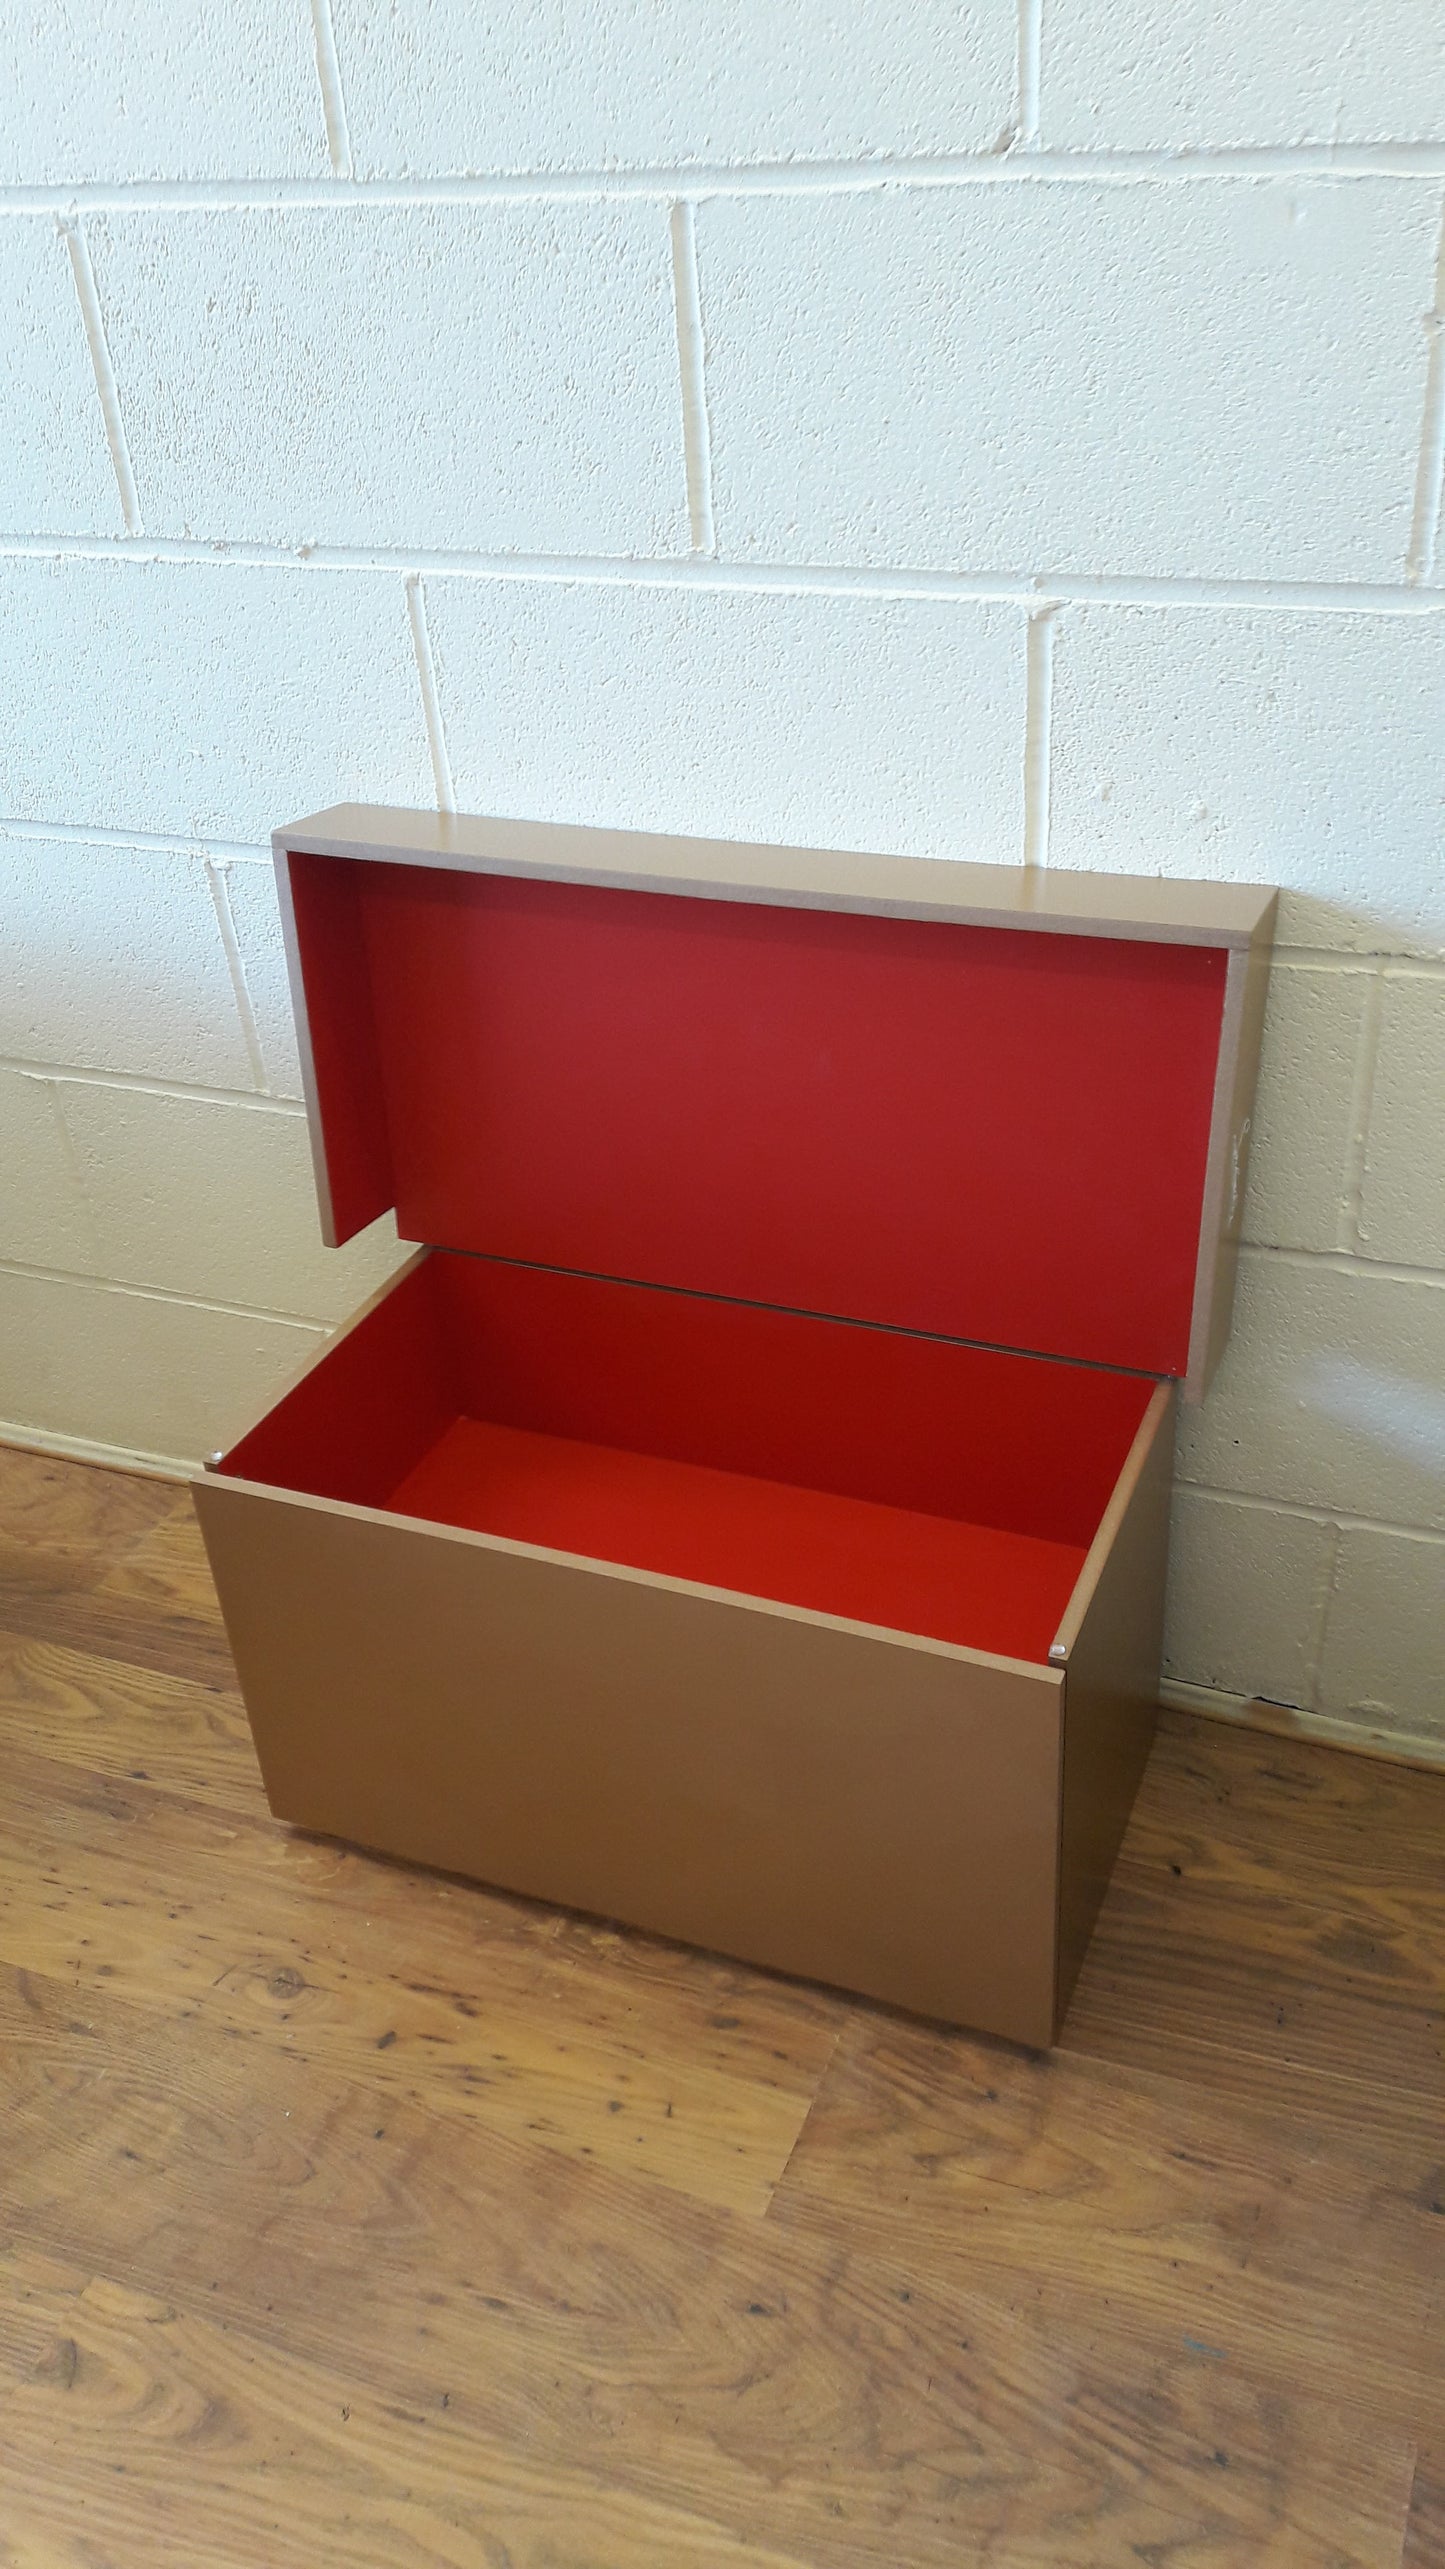 XL Shoe Storage Box - Holds 6-8no pairs of ladies shoes